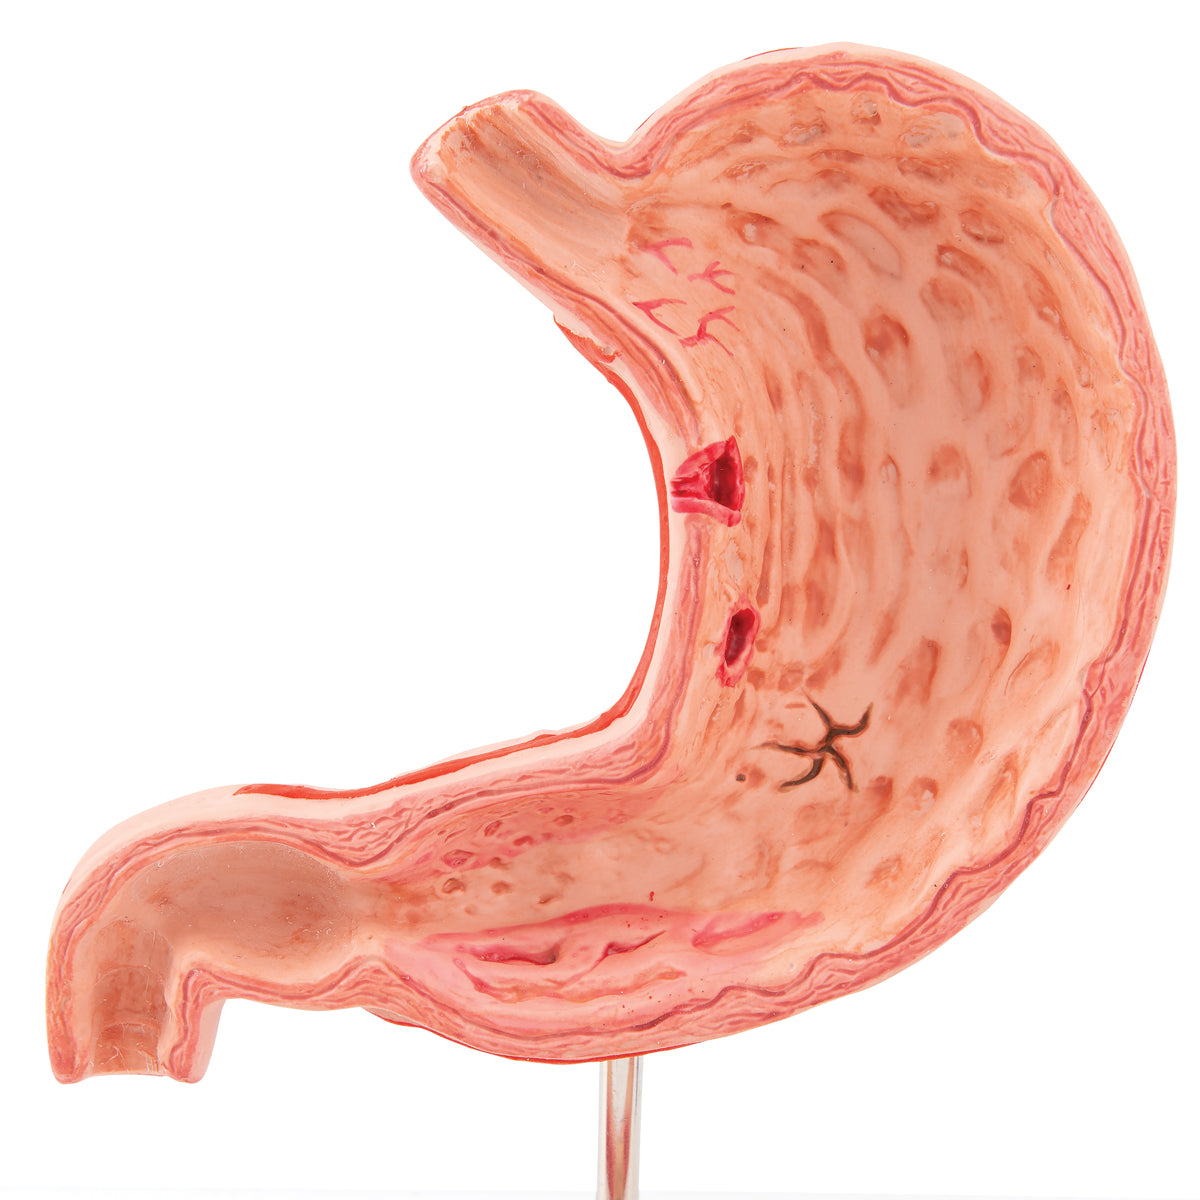 Reduced and detailed model of the stomach showing inflammation and ulcers